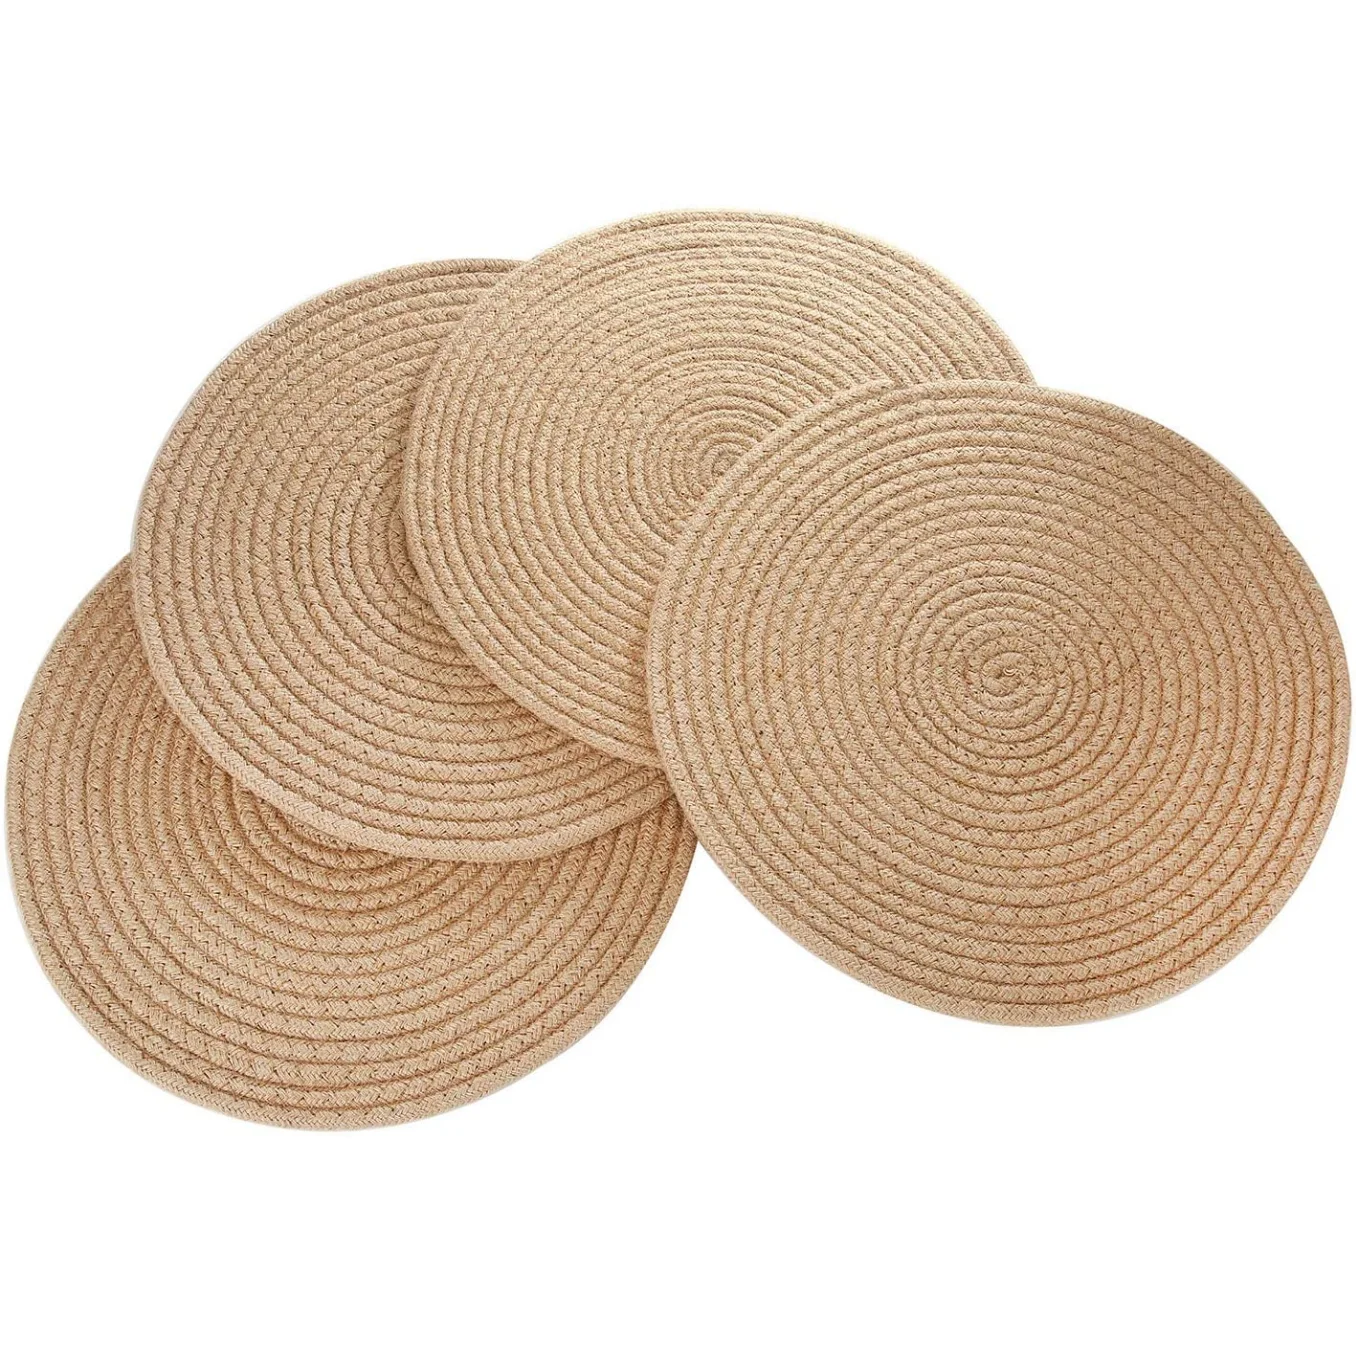 100% Natural Handmade Wholesale Place Mats Round Braided Table Placemat Custom Printed Dinning Table Mats From Bangladesh